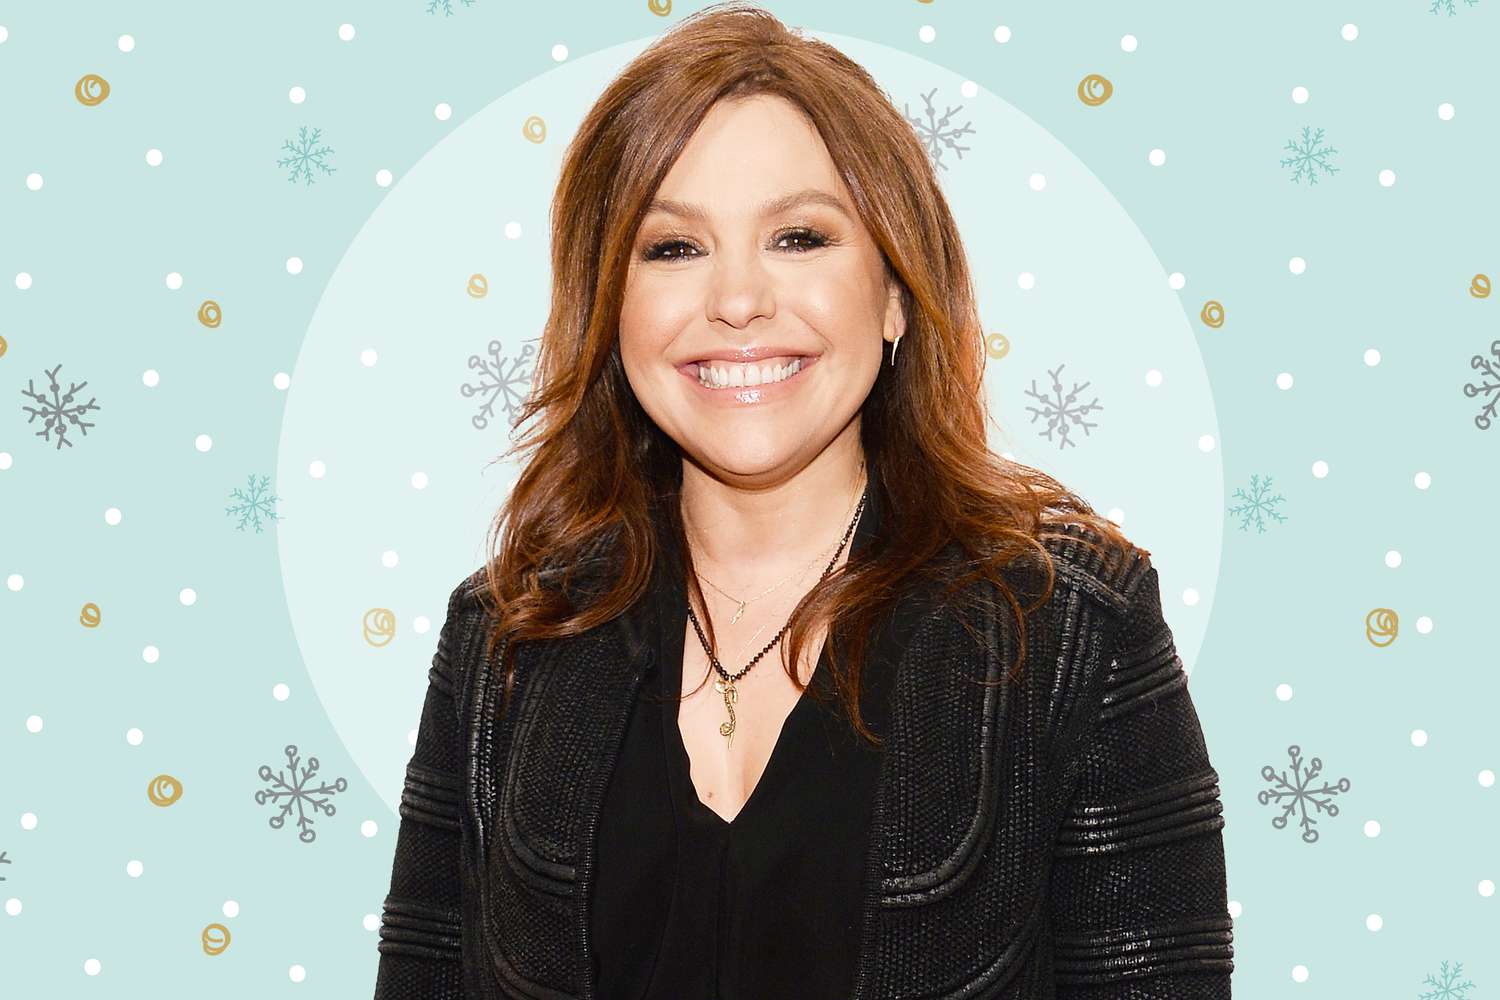 Rachael Ray on a holiday themed background